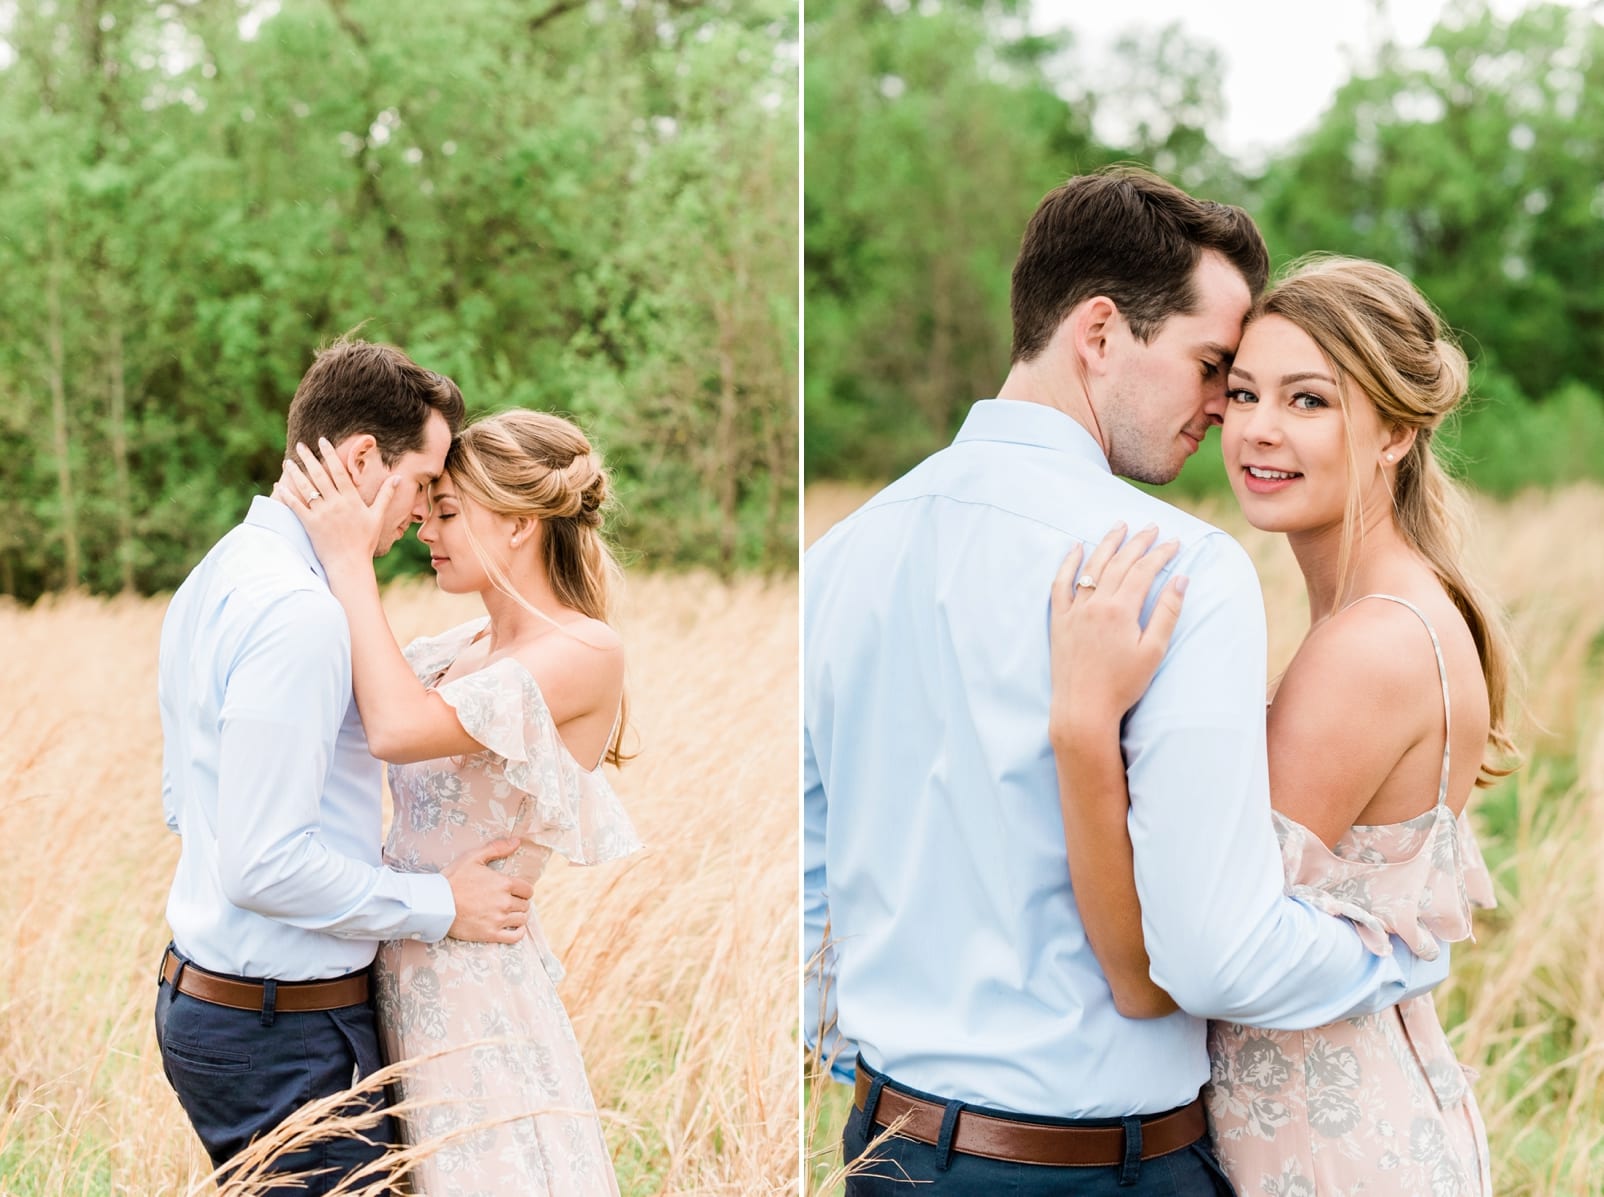 Raleigh engagement session couple embracing in a wheat field photo